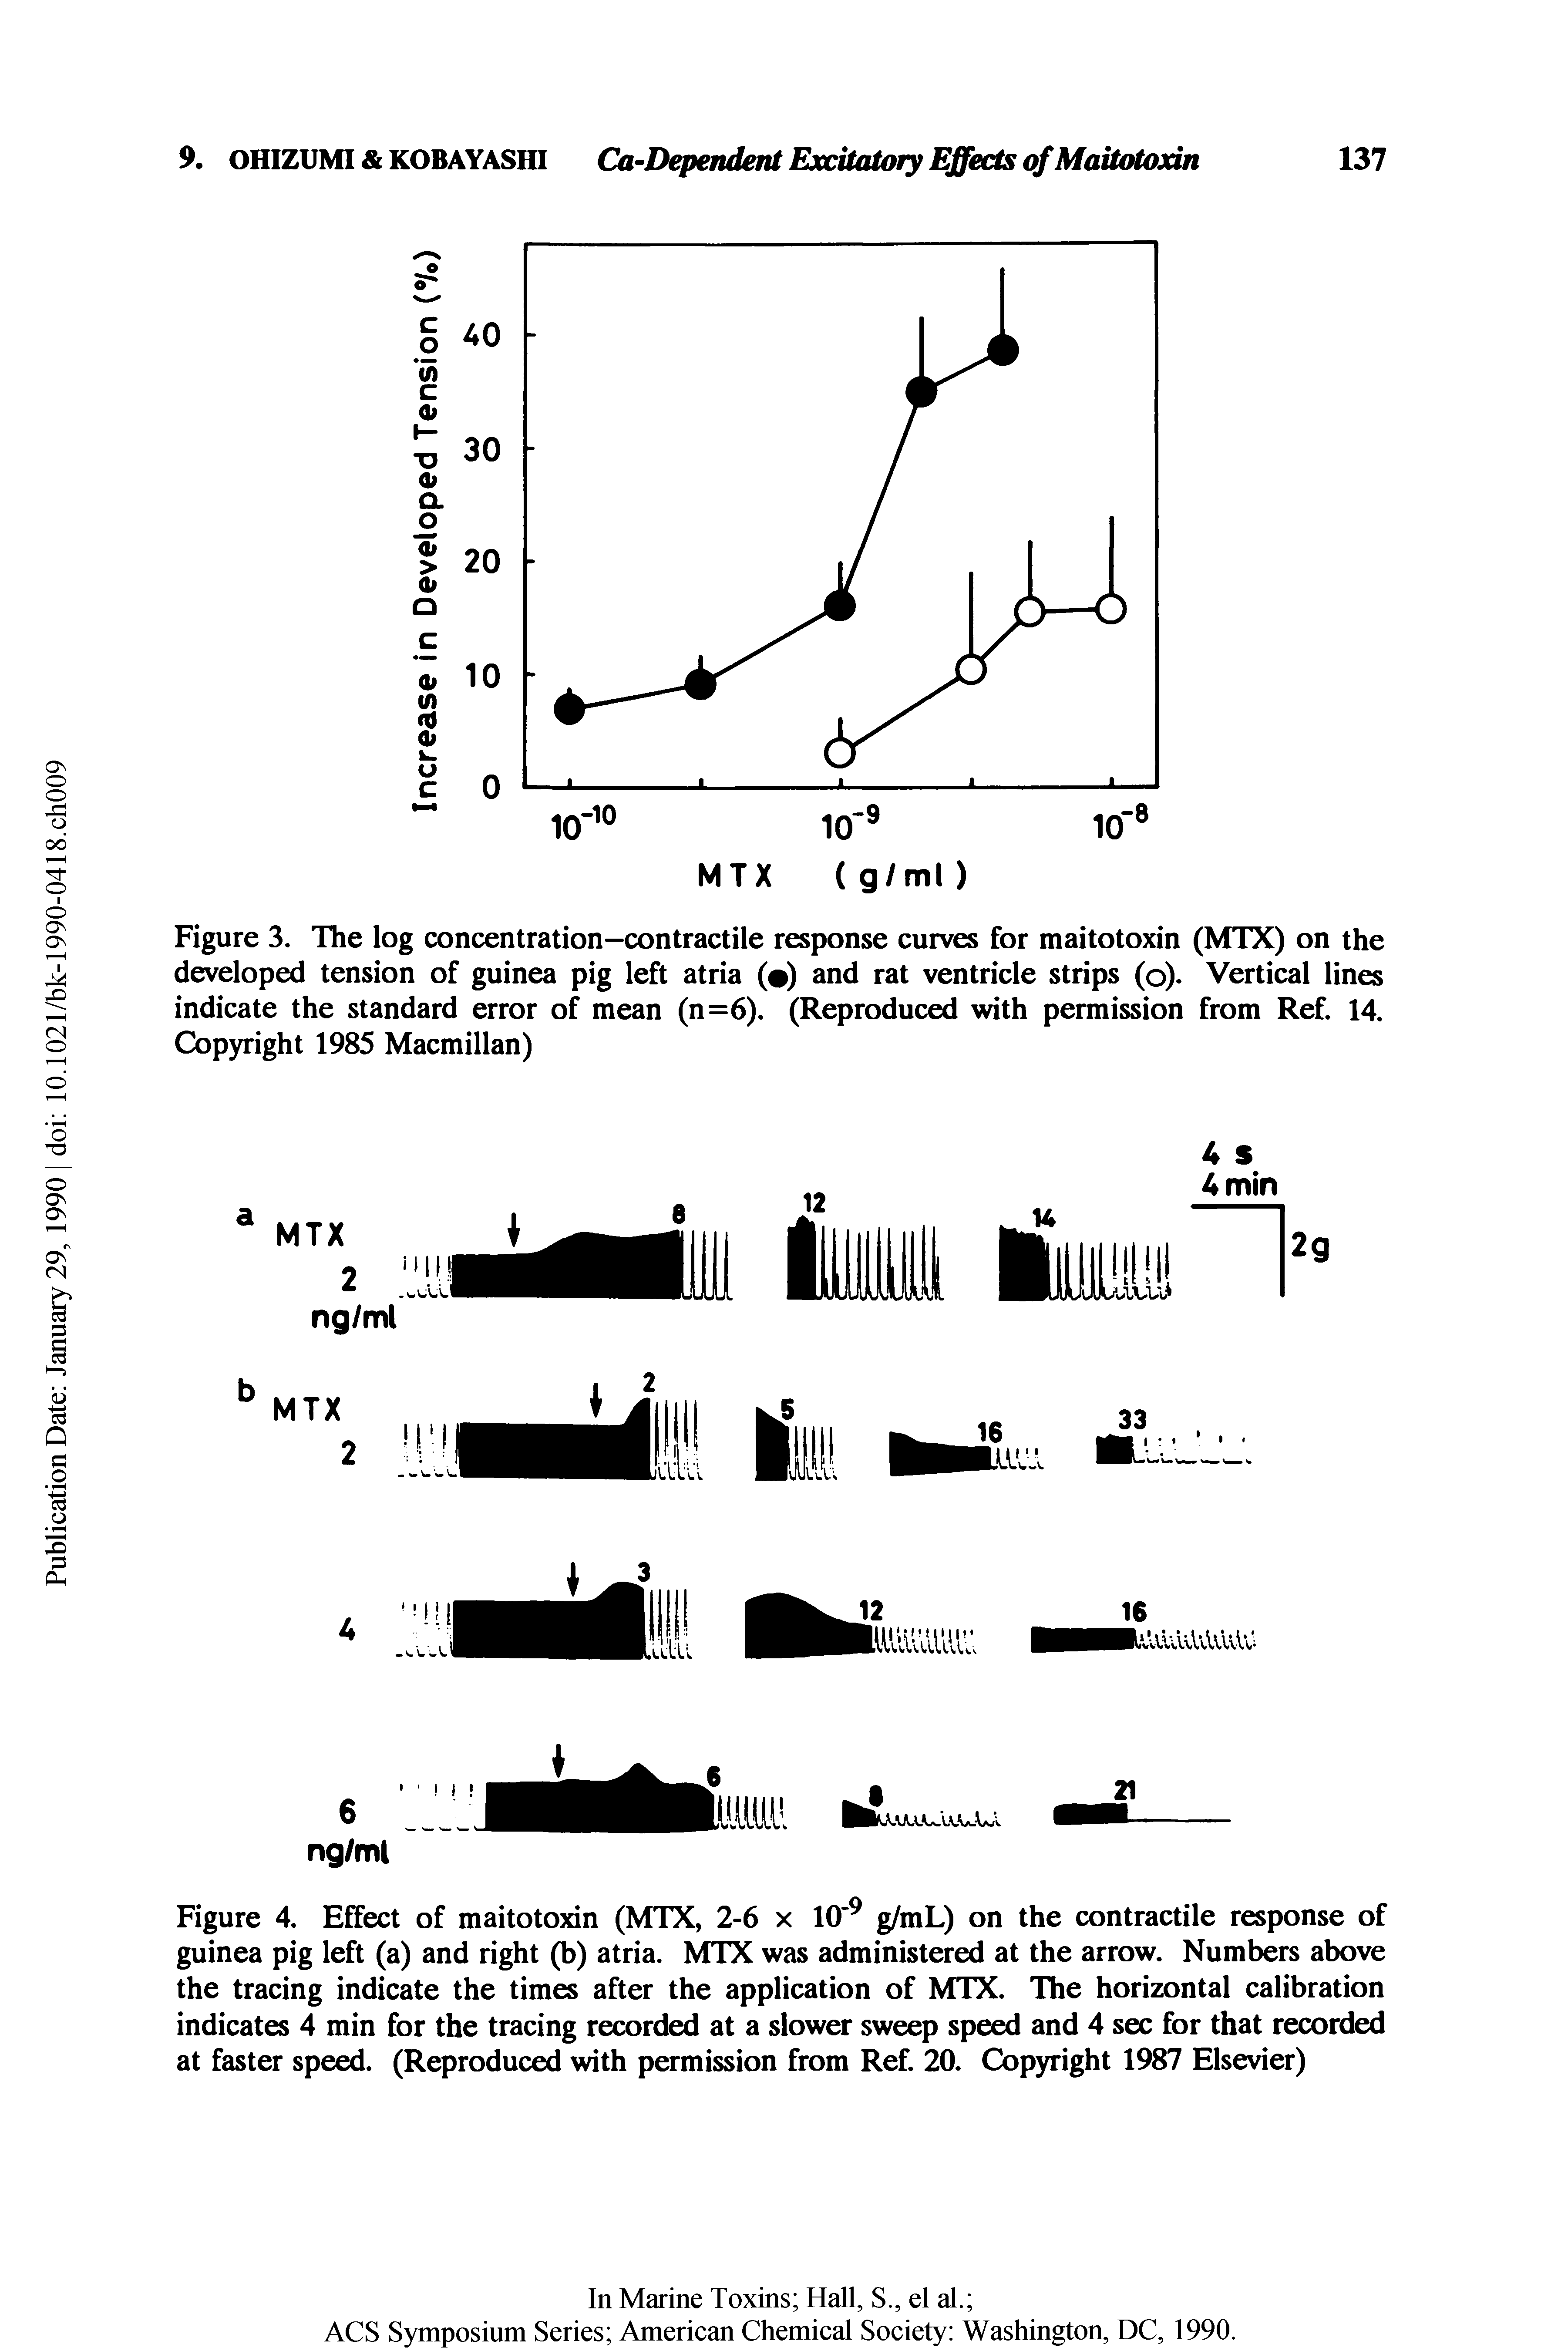 Figure 3. The log concentration-contractile response curves for maitotoxin (MTX) on the developed tension of guinea pig left atria ( ) and rat ventricle strips (o). Vertical lines indicate the standard error of mean (n=6). (Reproduced with permission from Ref. 14. Copyright 1985 Macmillan)...